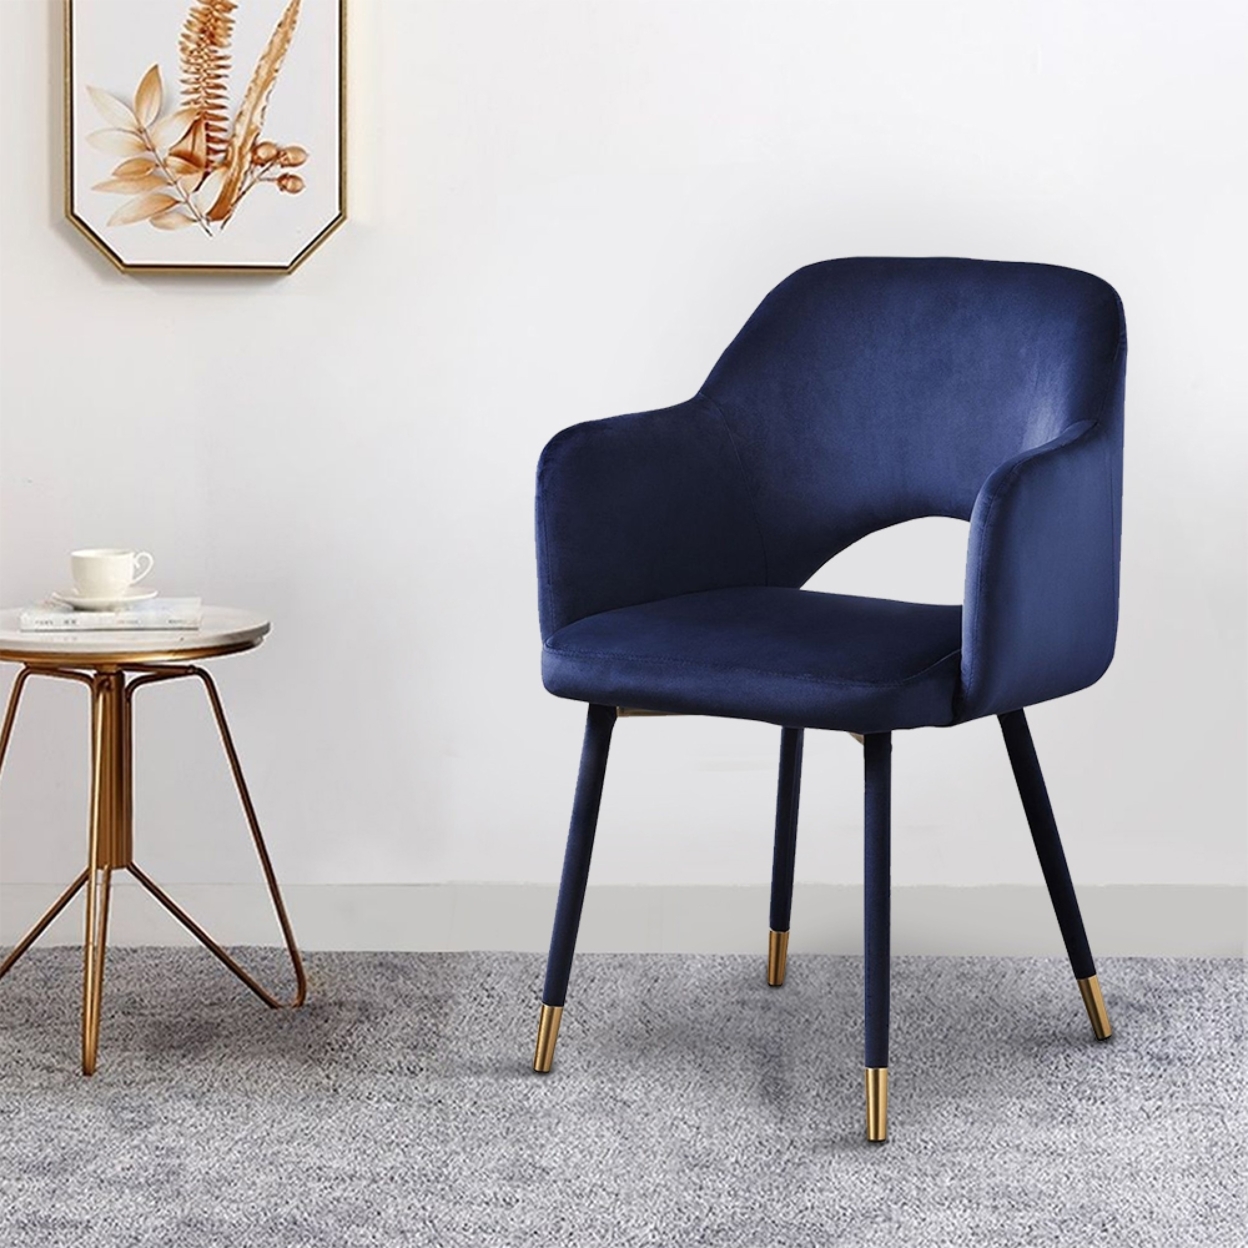 Velvet Padded Accent Chair With Open Back And Angled Legs, Blue And Gold- Saltoro Sherpi